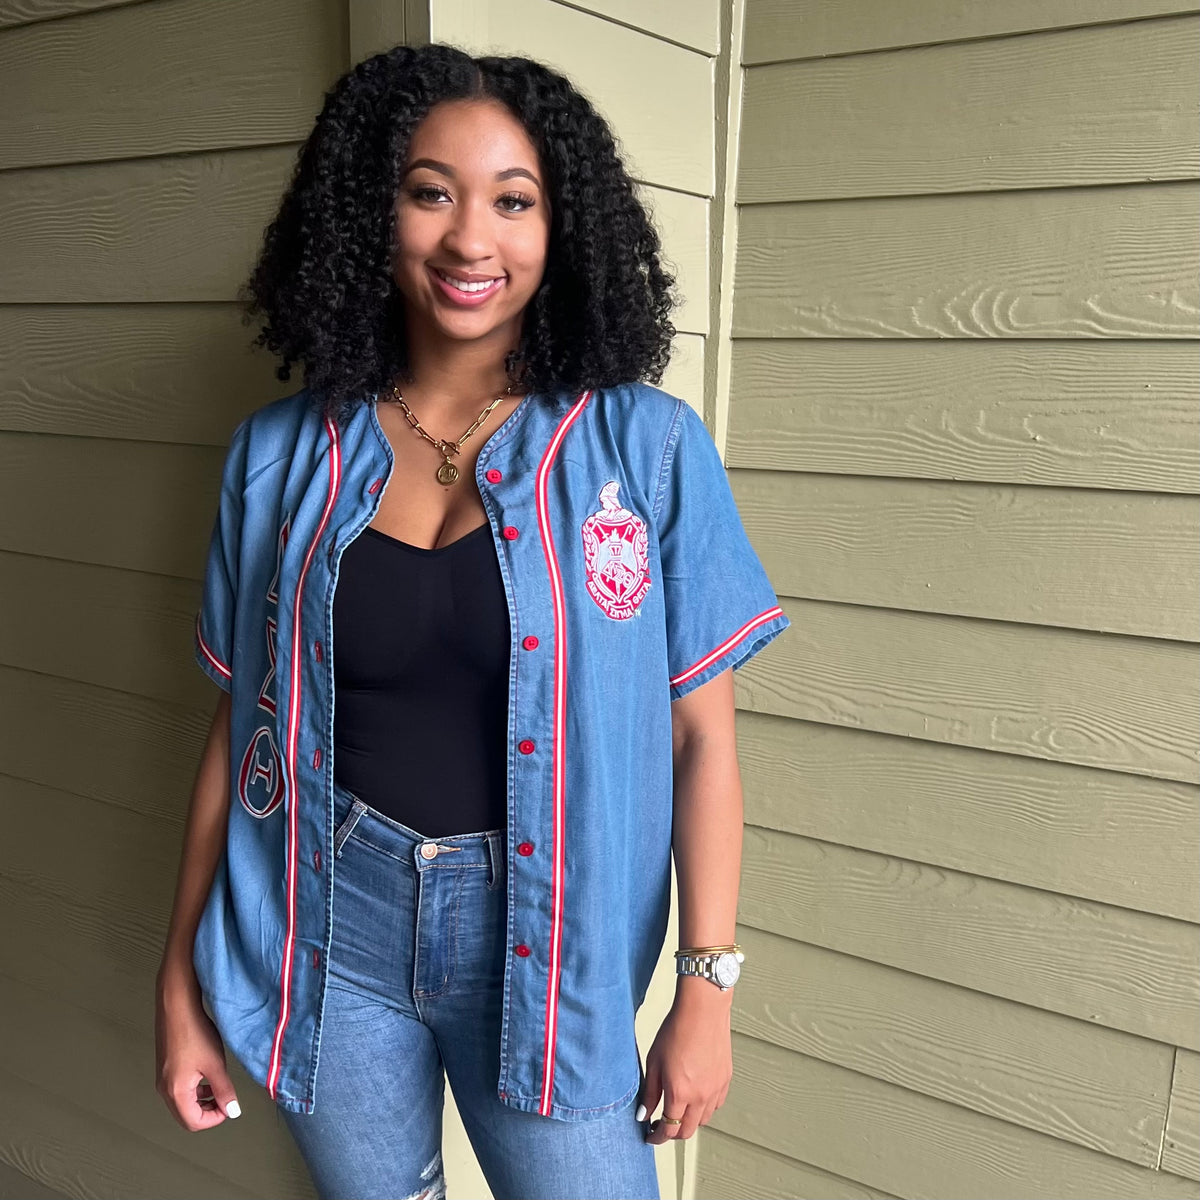 Delta Denim Baseball Jersey – The King McNeal Collection